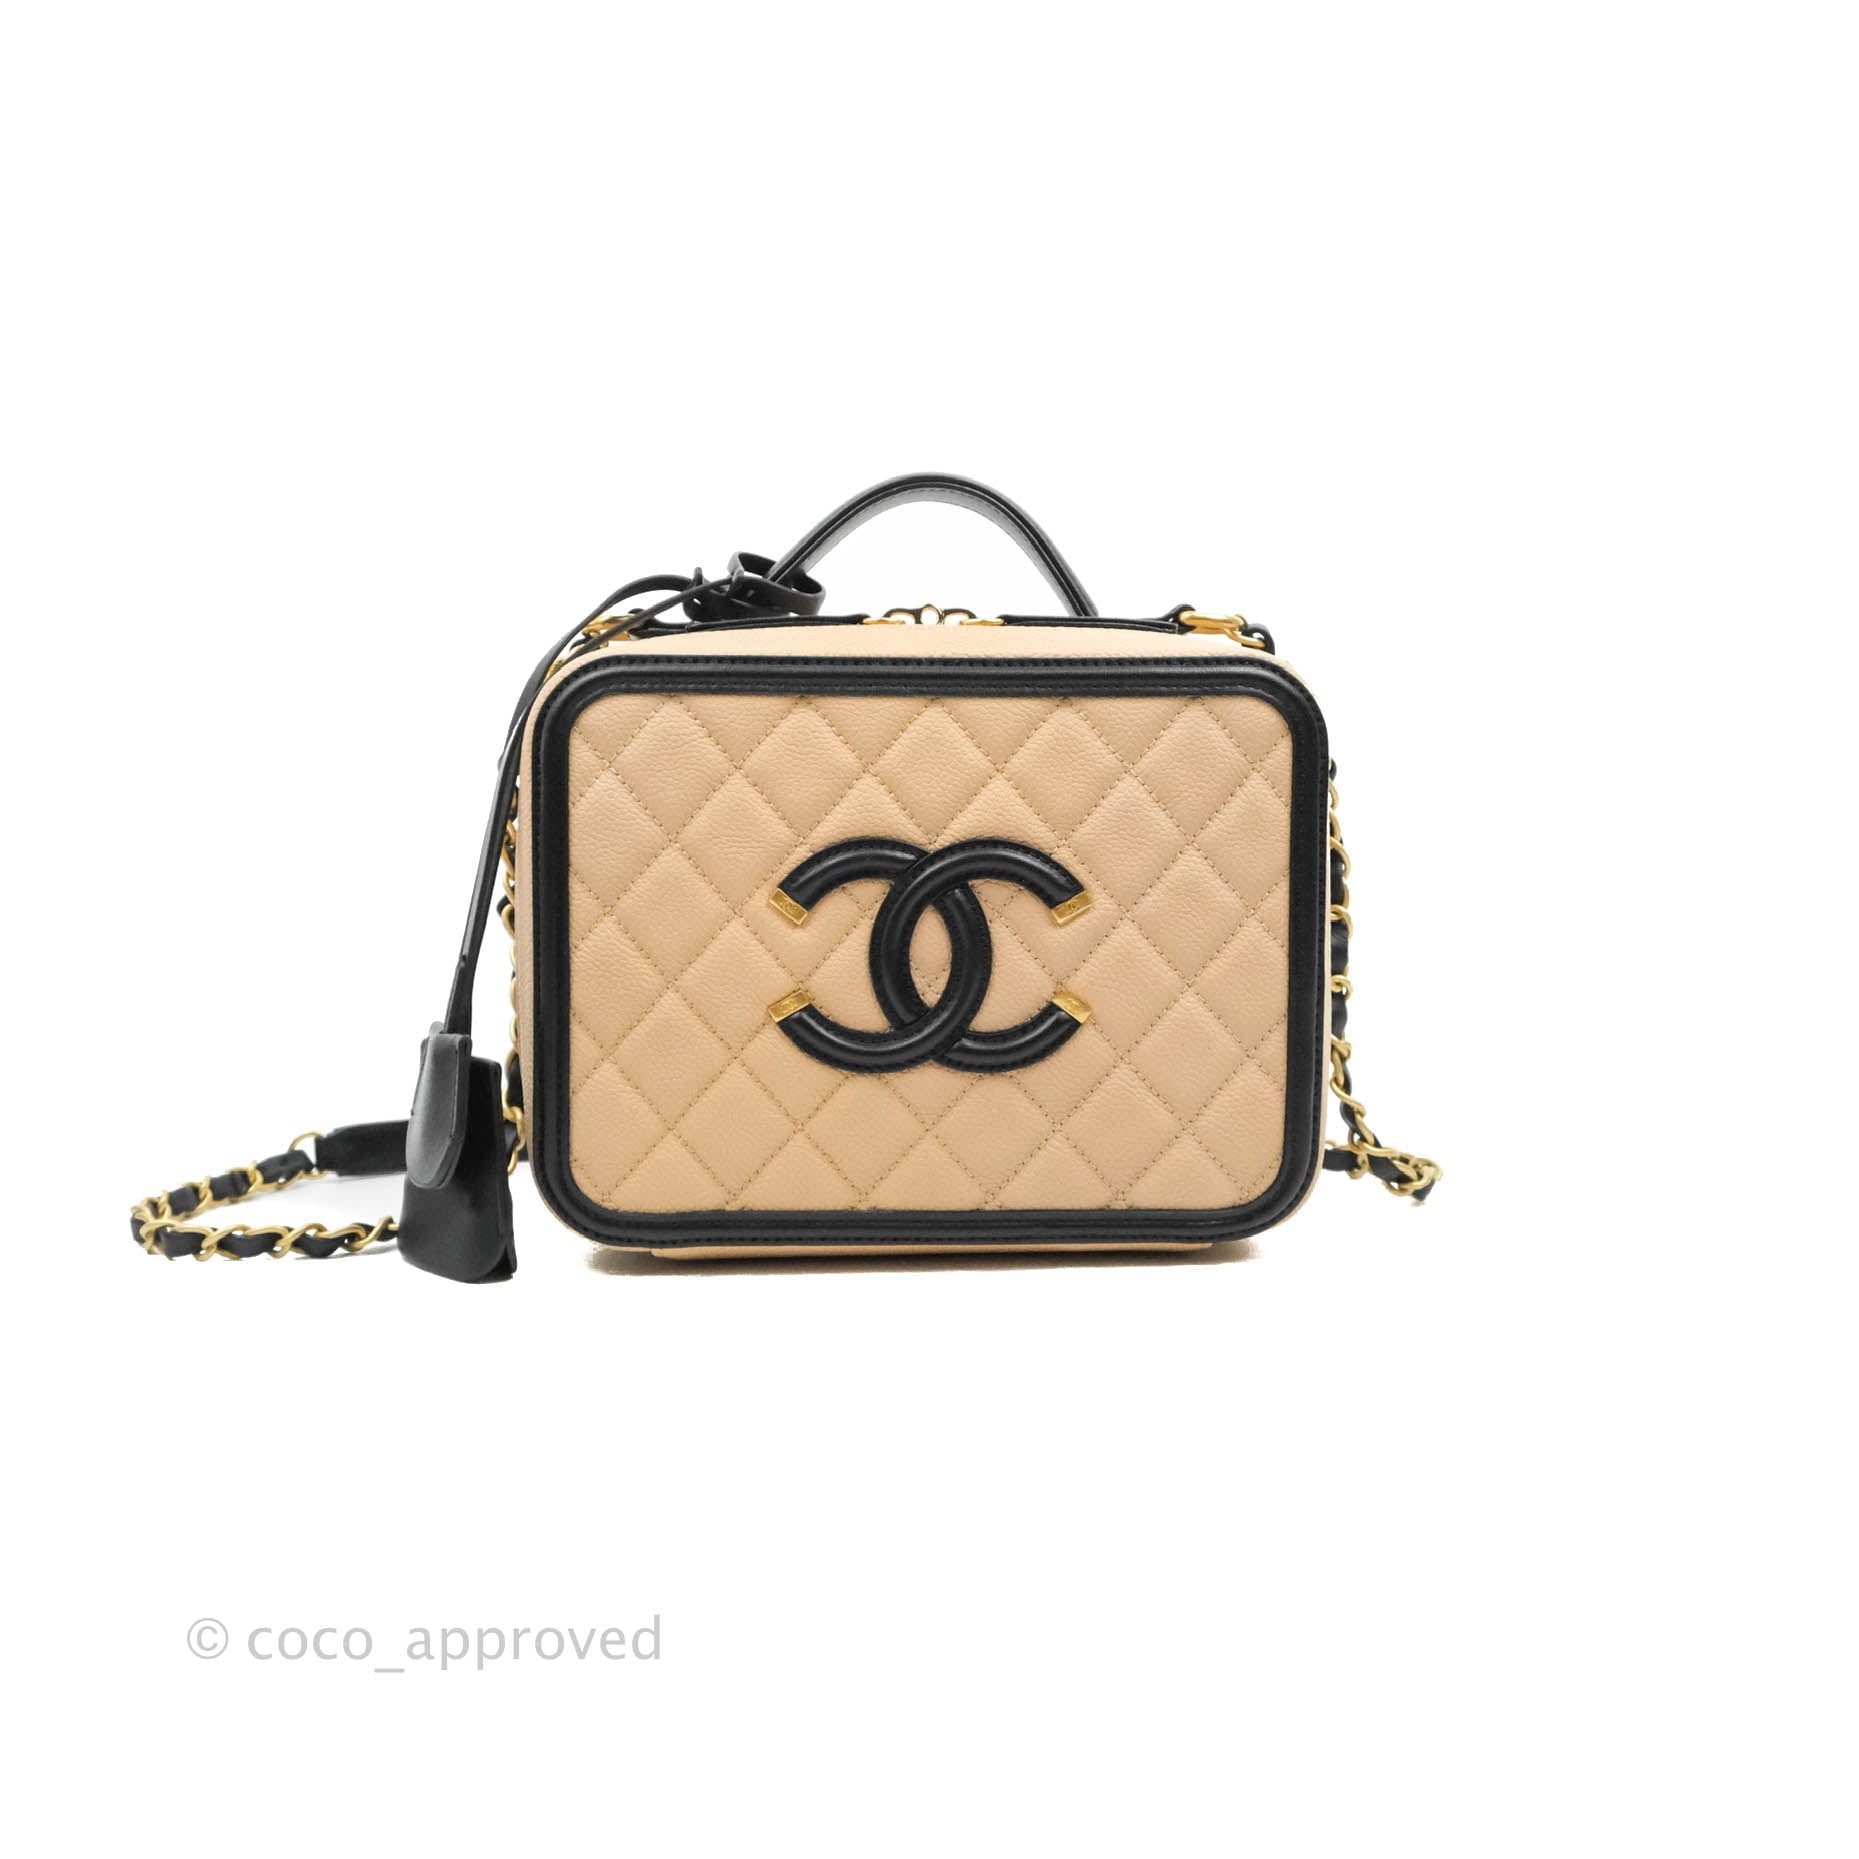 Chanel Filigree Vanity Case Quilted Caviar Medium  Vanity case, Chanel  vanity case, Bag accessories